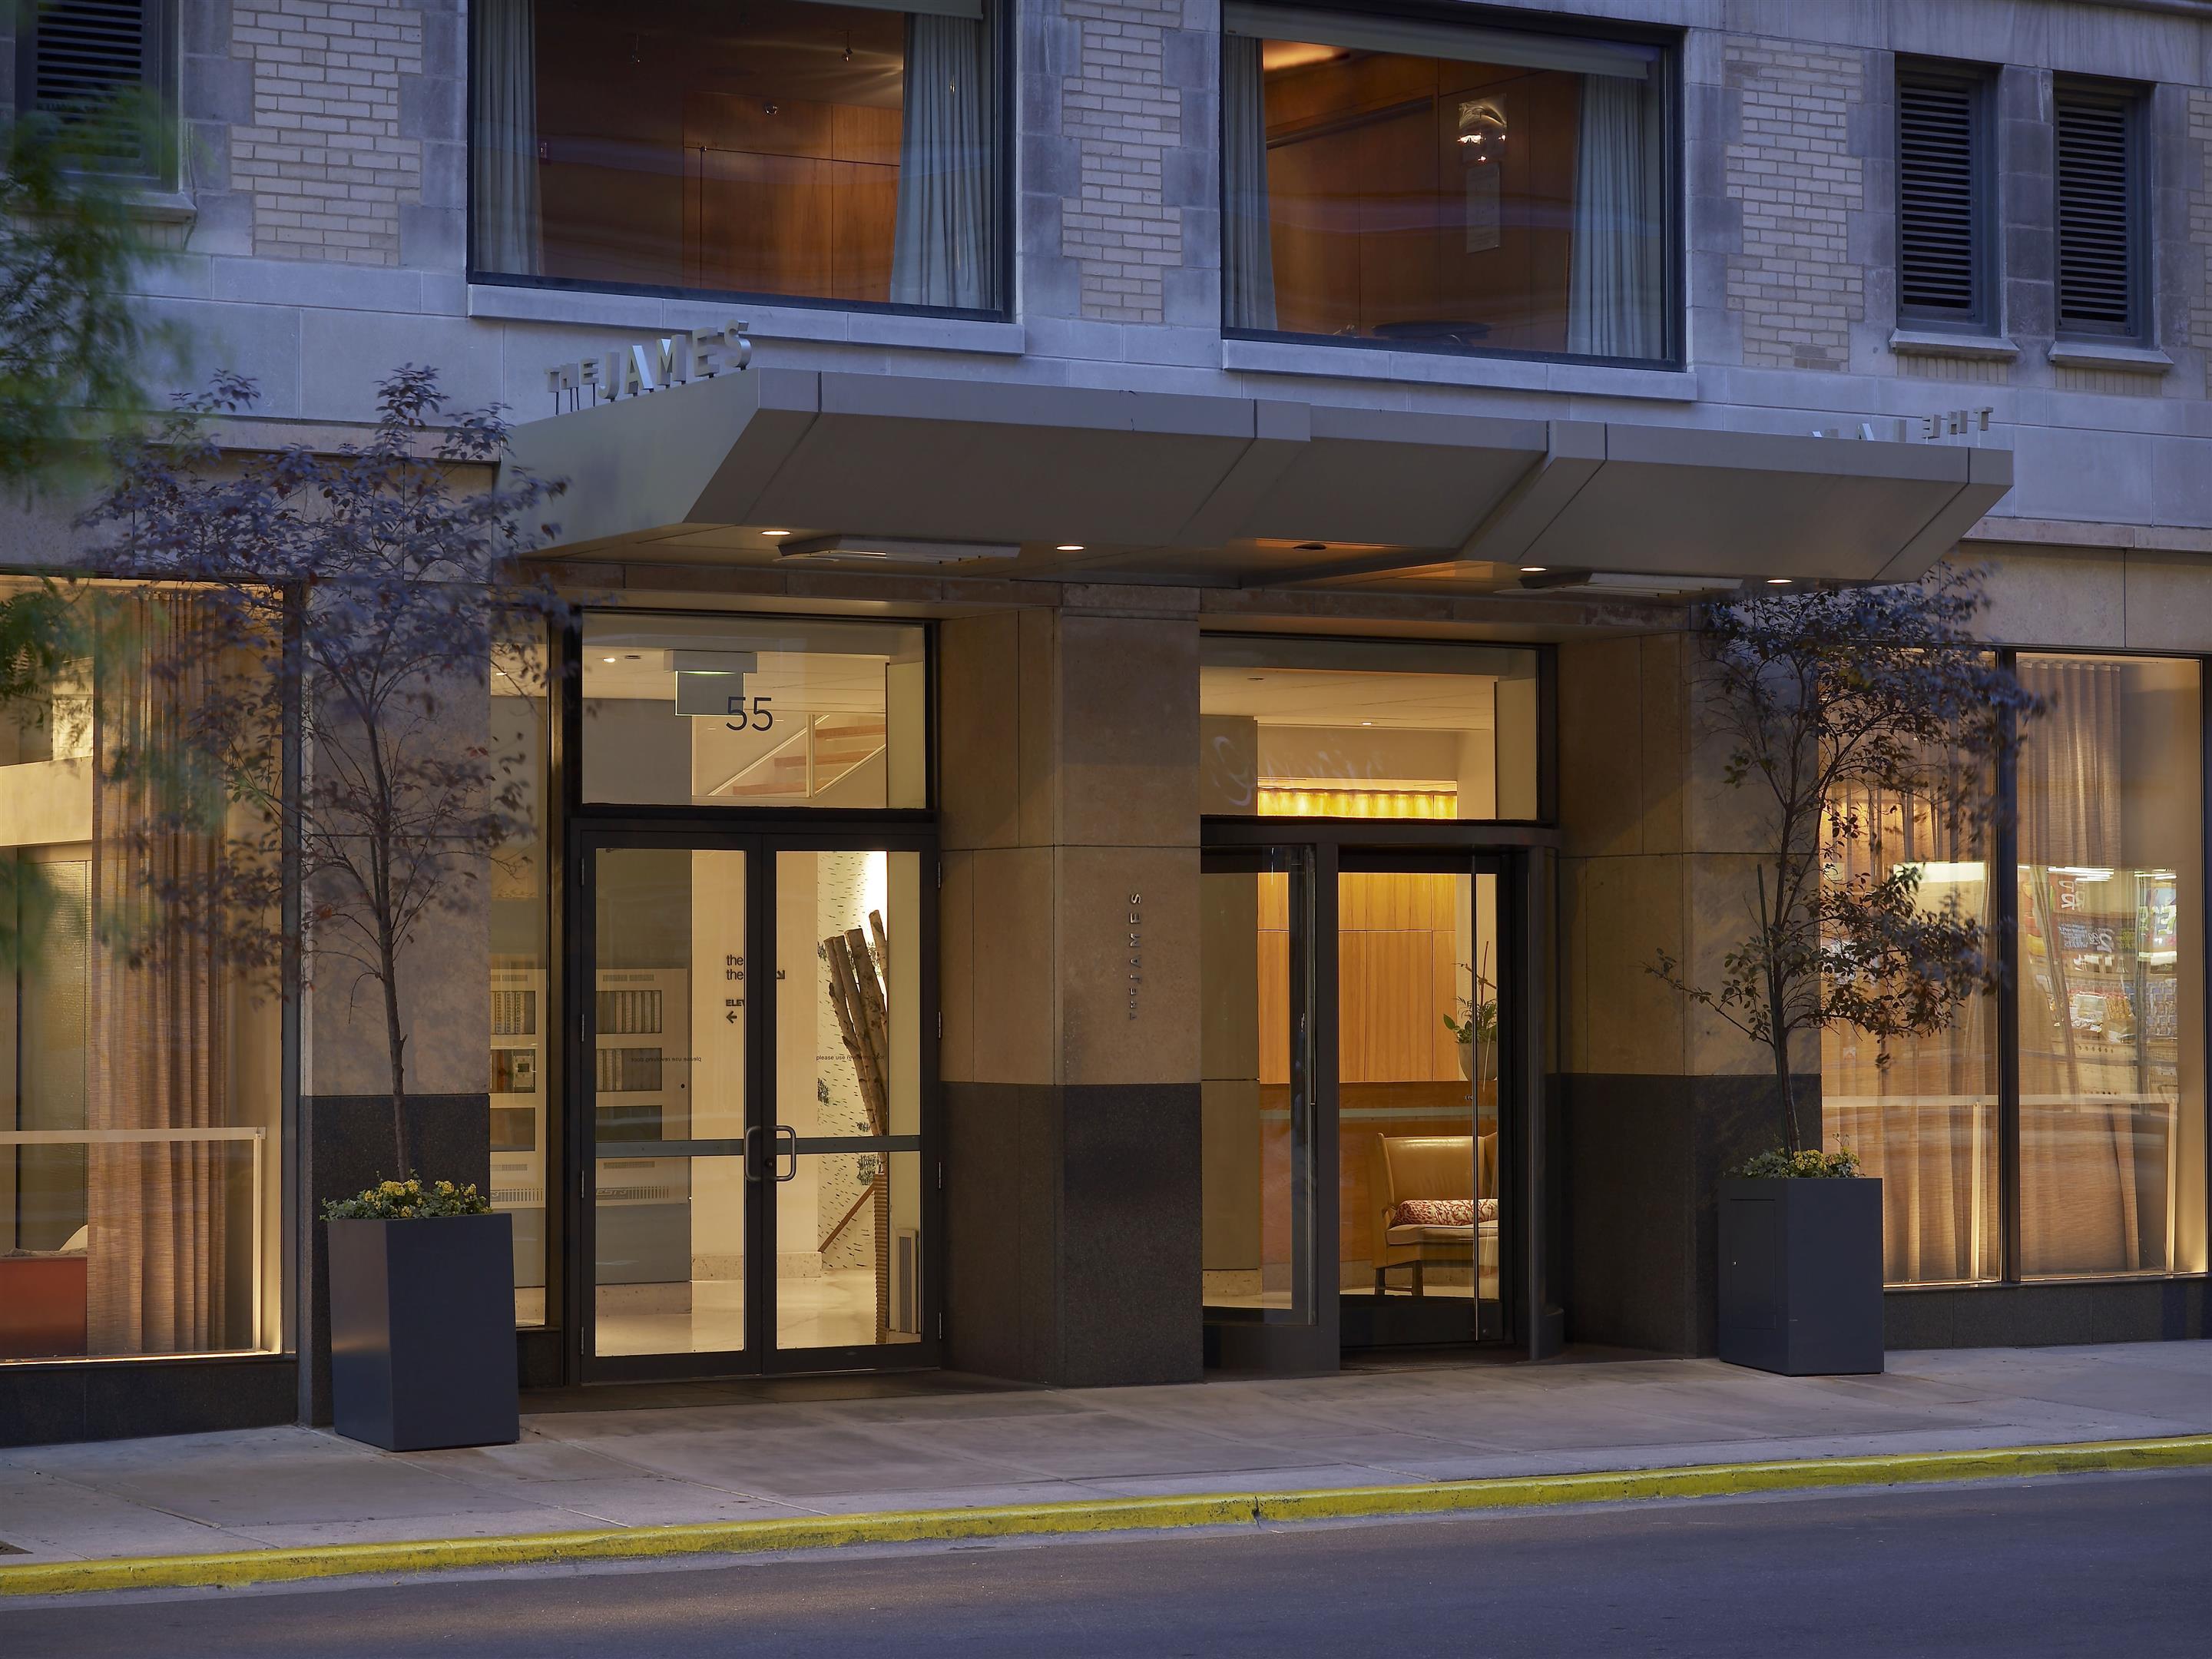 Exterior View 21c Museum Hotel Chicago - MGallery